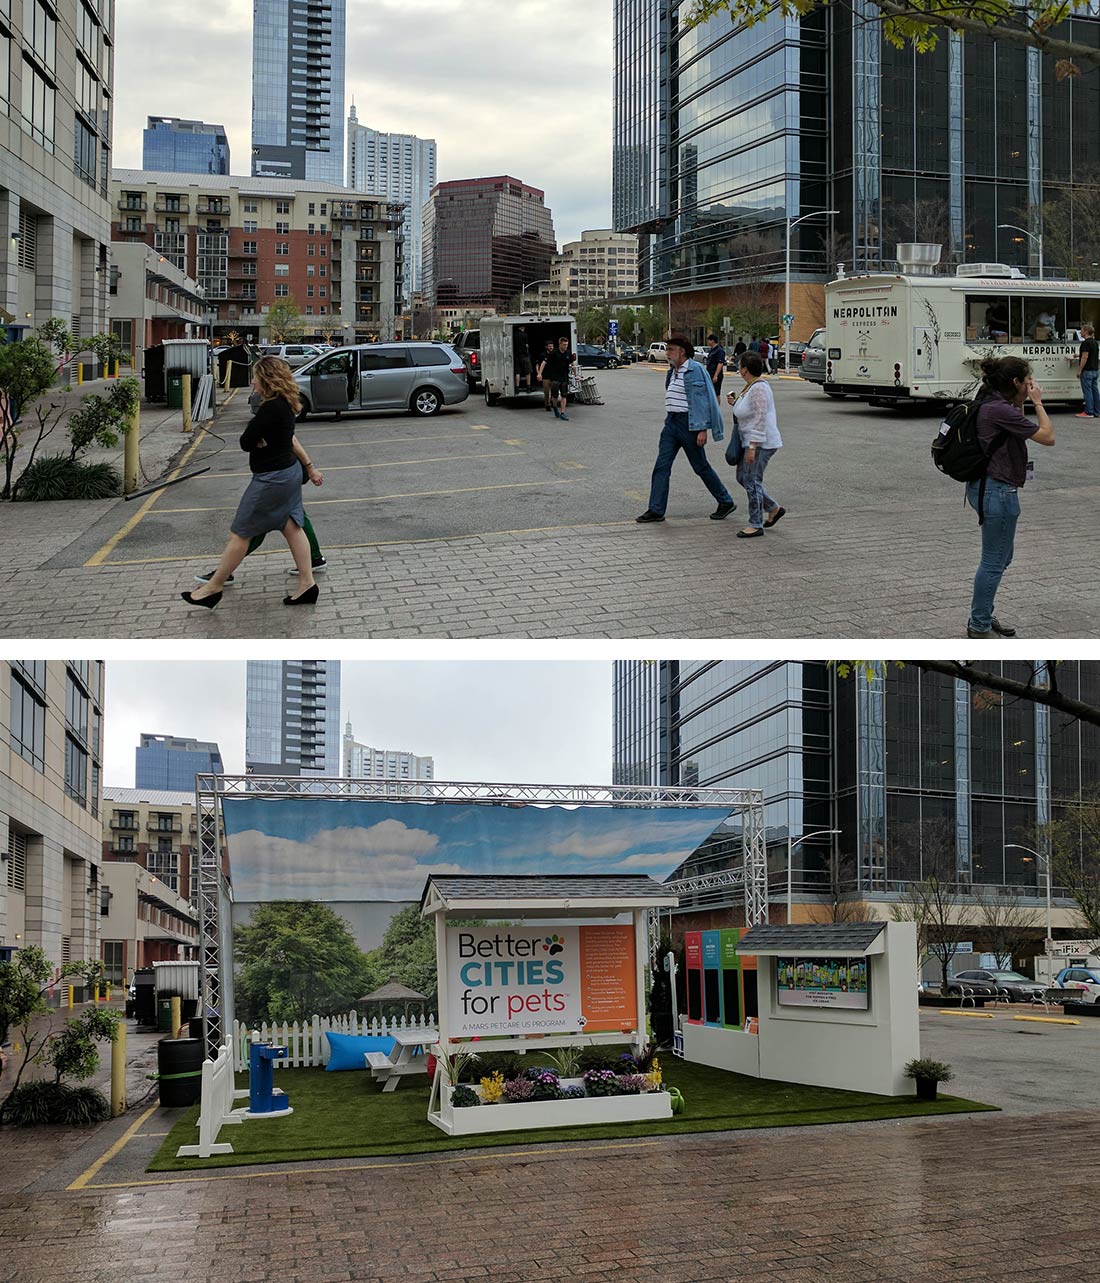 Austin before and after adding a pop-up park for city pets